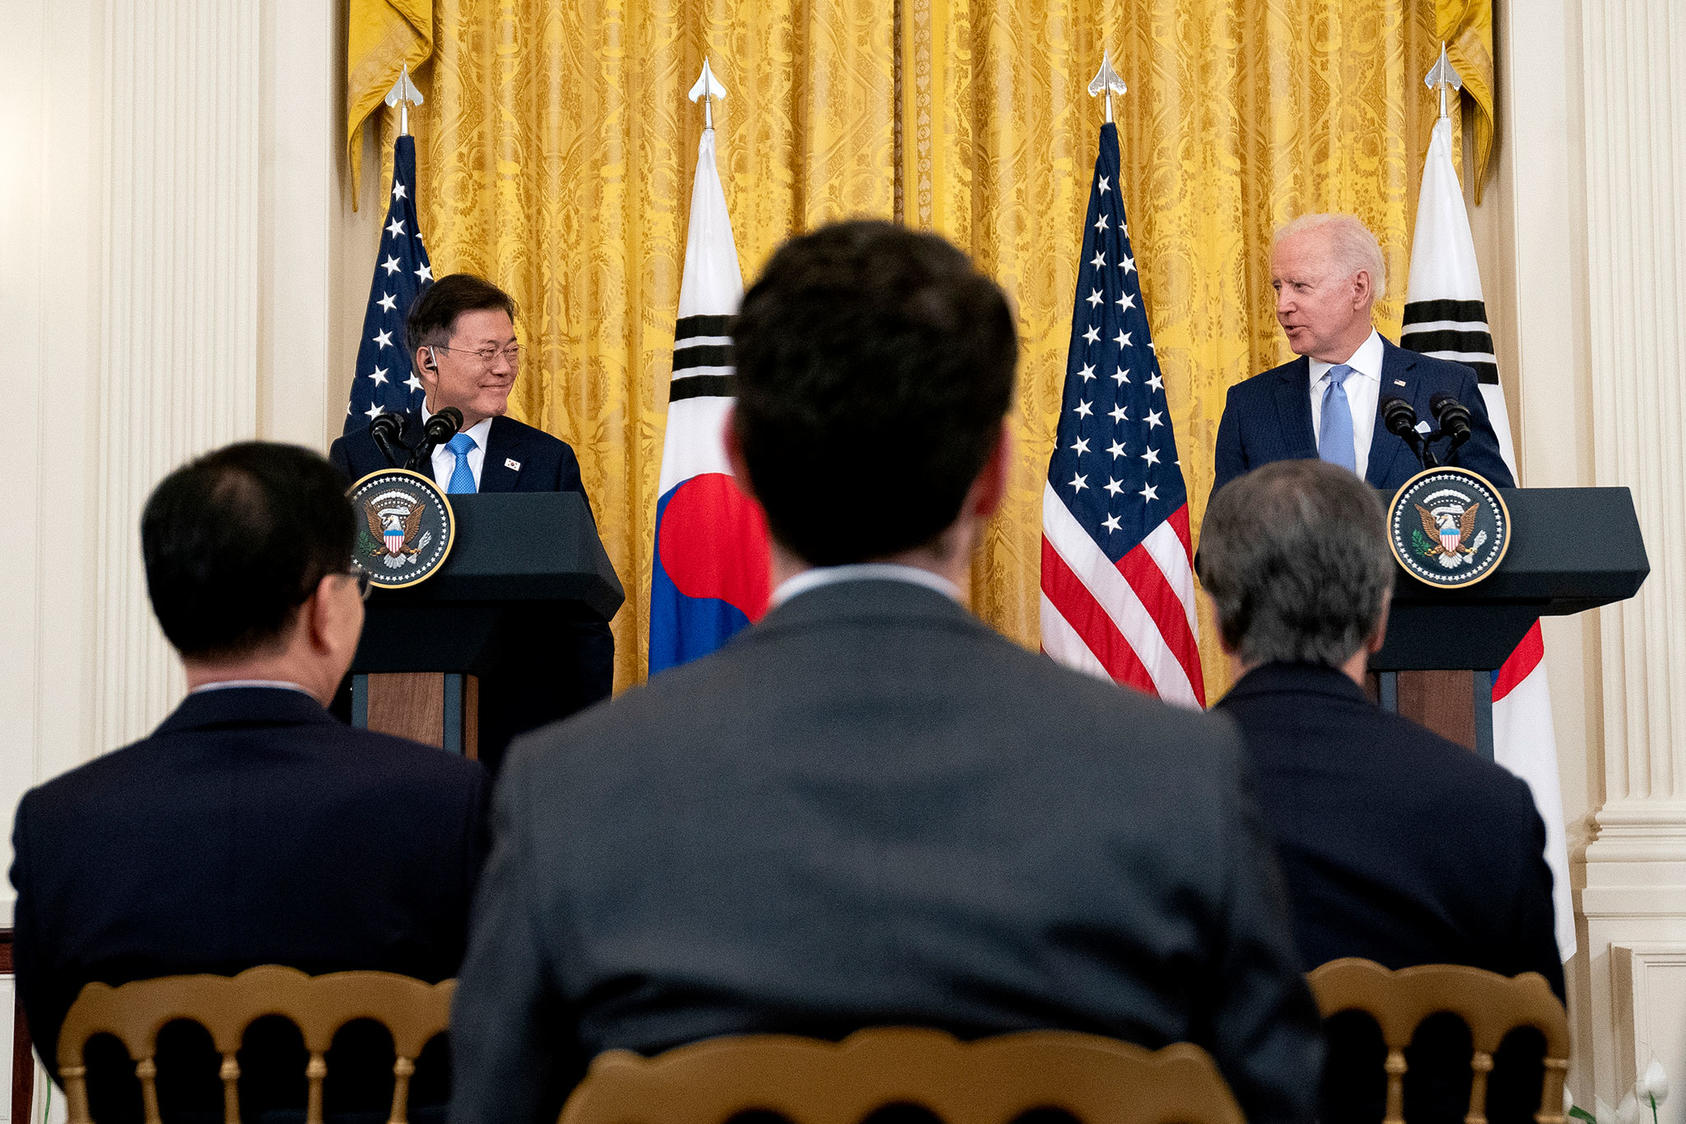 U.S. President Joe Biden and South Korean President Moon Jae-in during a joint press conference at the White House in Washington on Friday, May 21, 2021. (Stefani Reynolds/The New York Times)